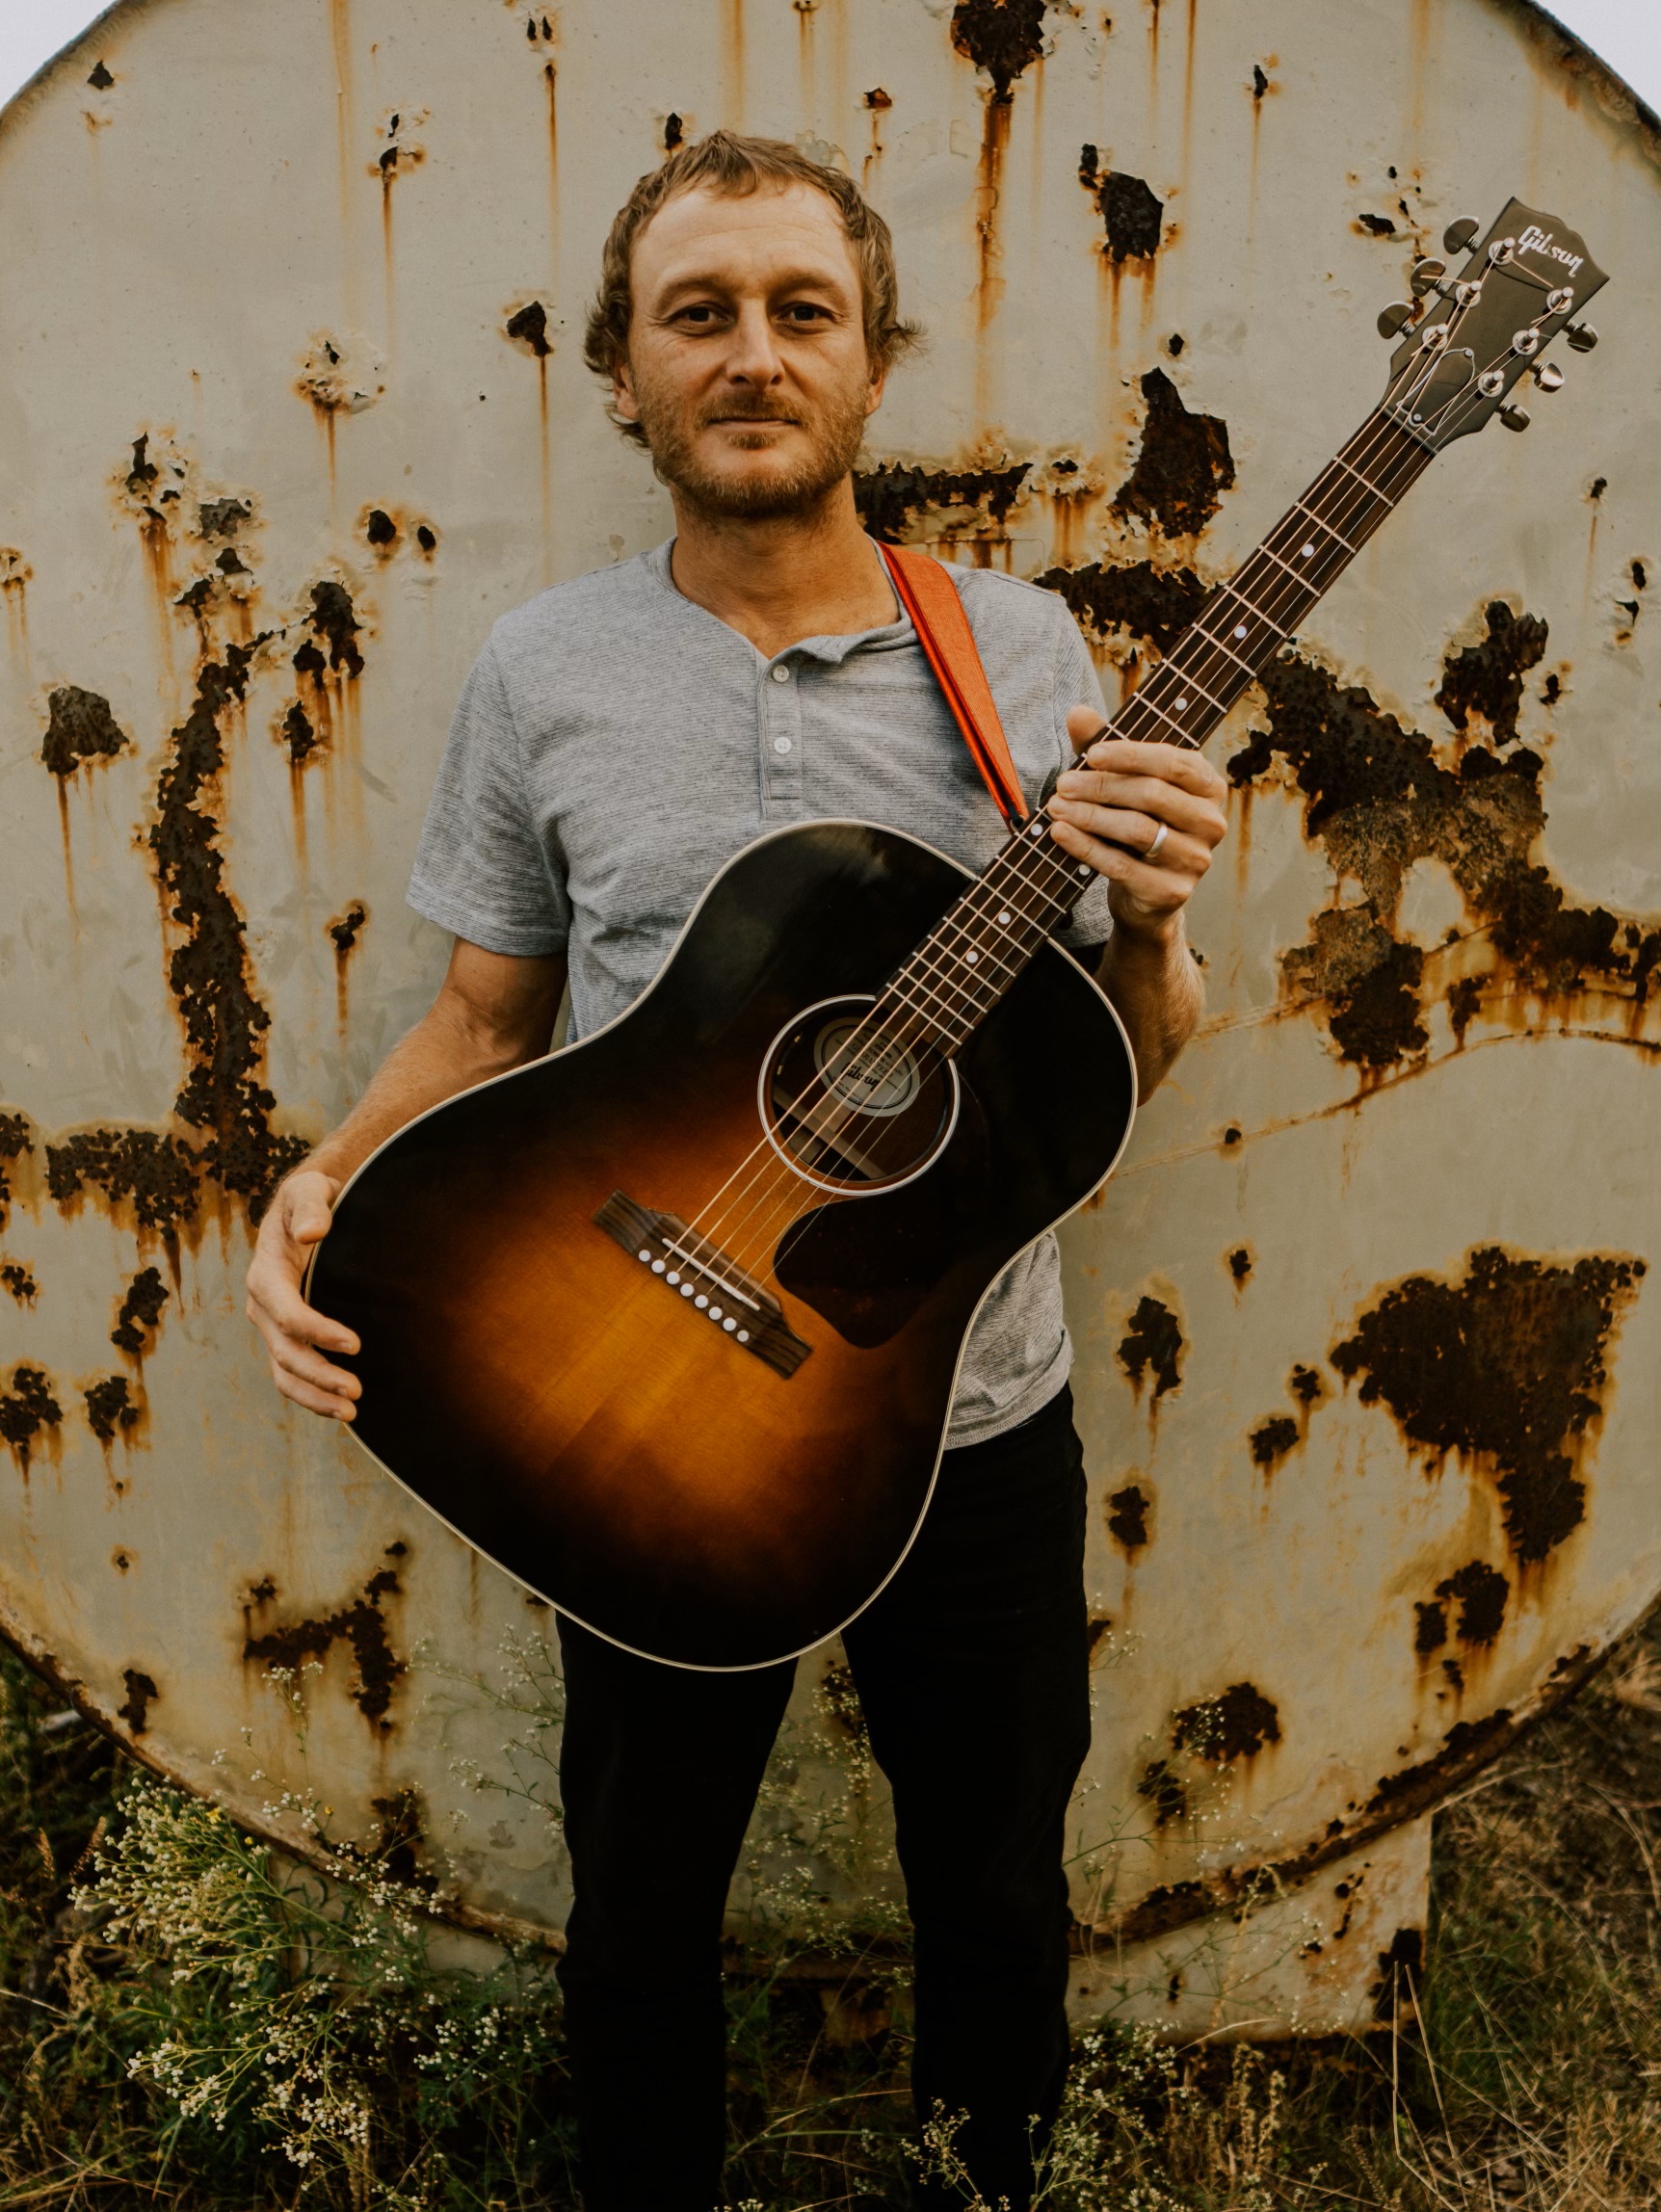 South African Folk Artisan ‘Luke Beling’ Set to Release Debut Album ‘A Stone in the Mouth of the Ocean’ – A Fusion of Melodies and Meaning